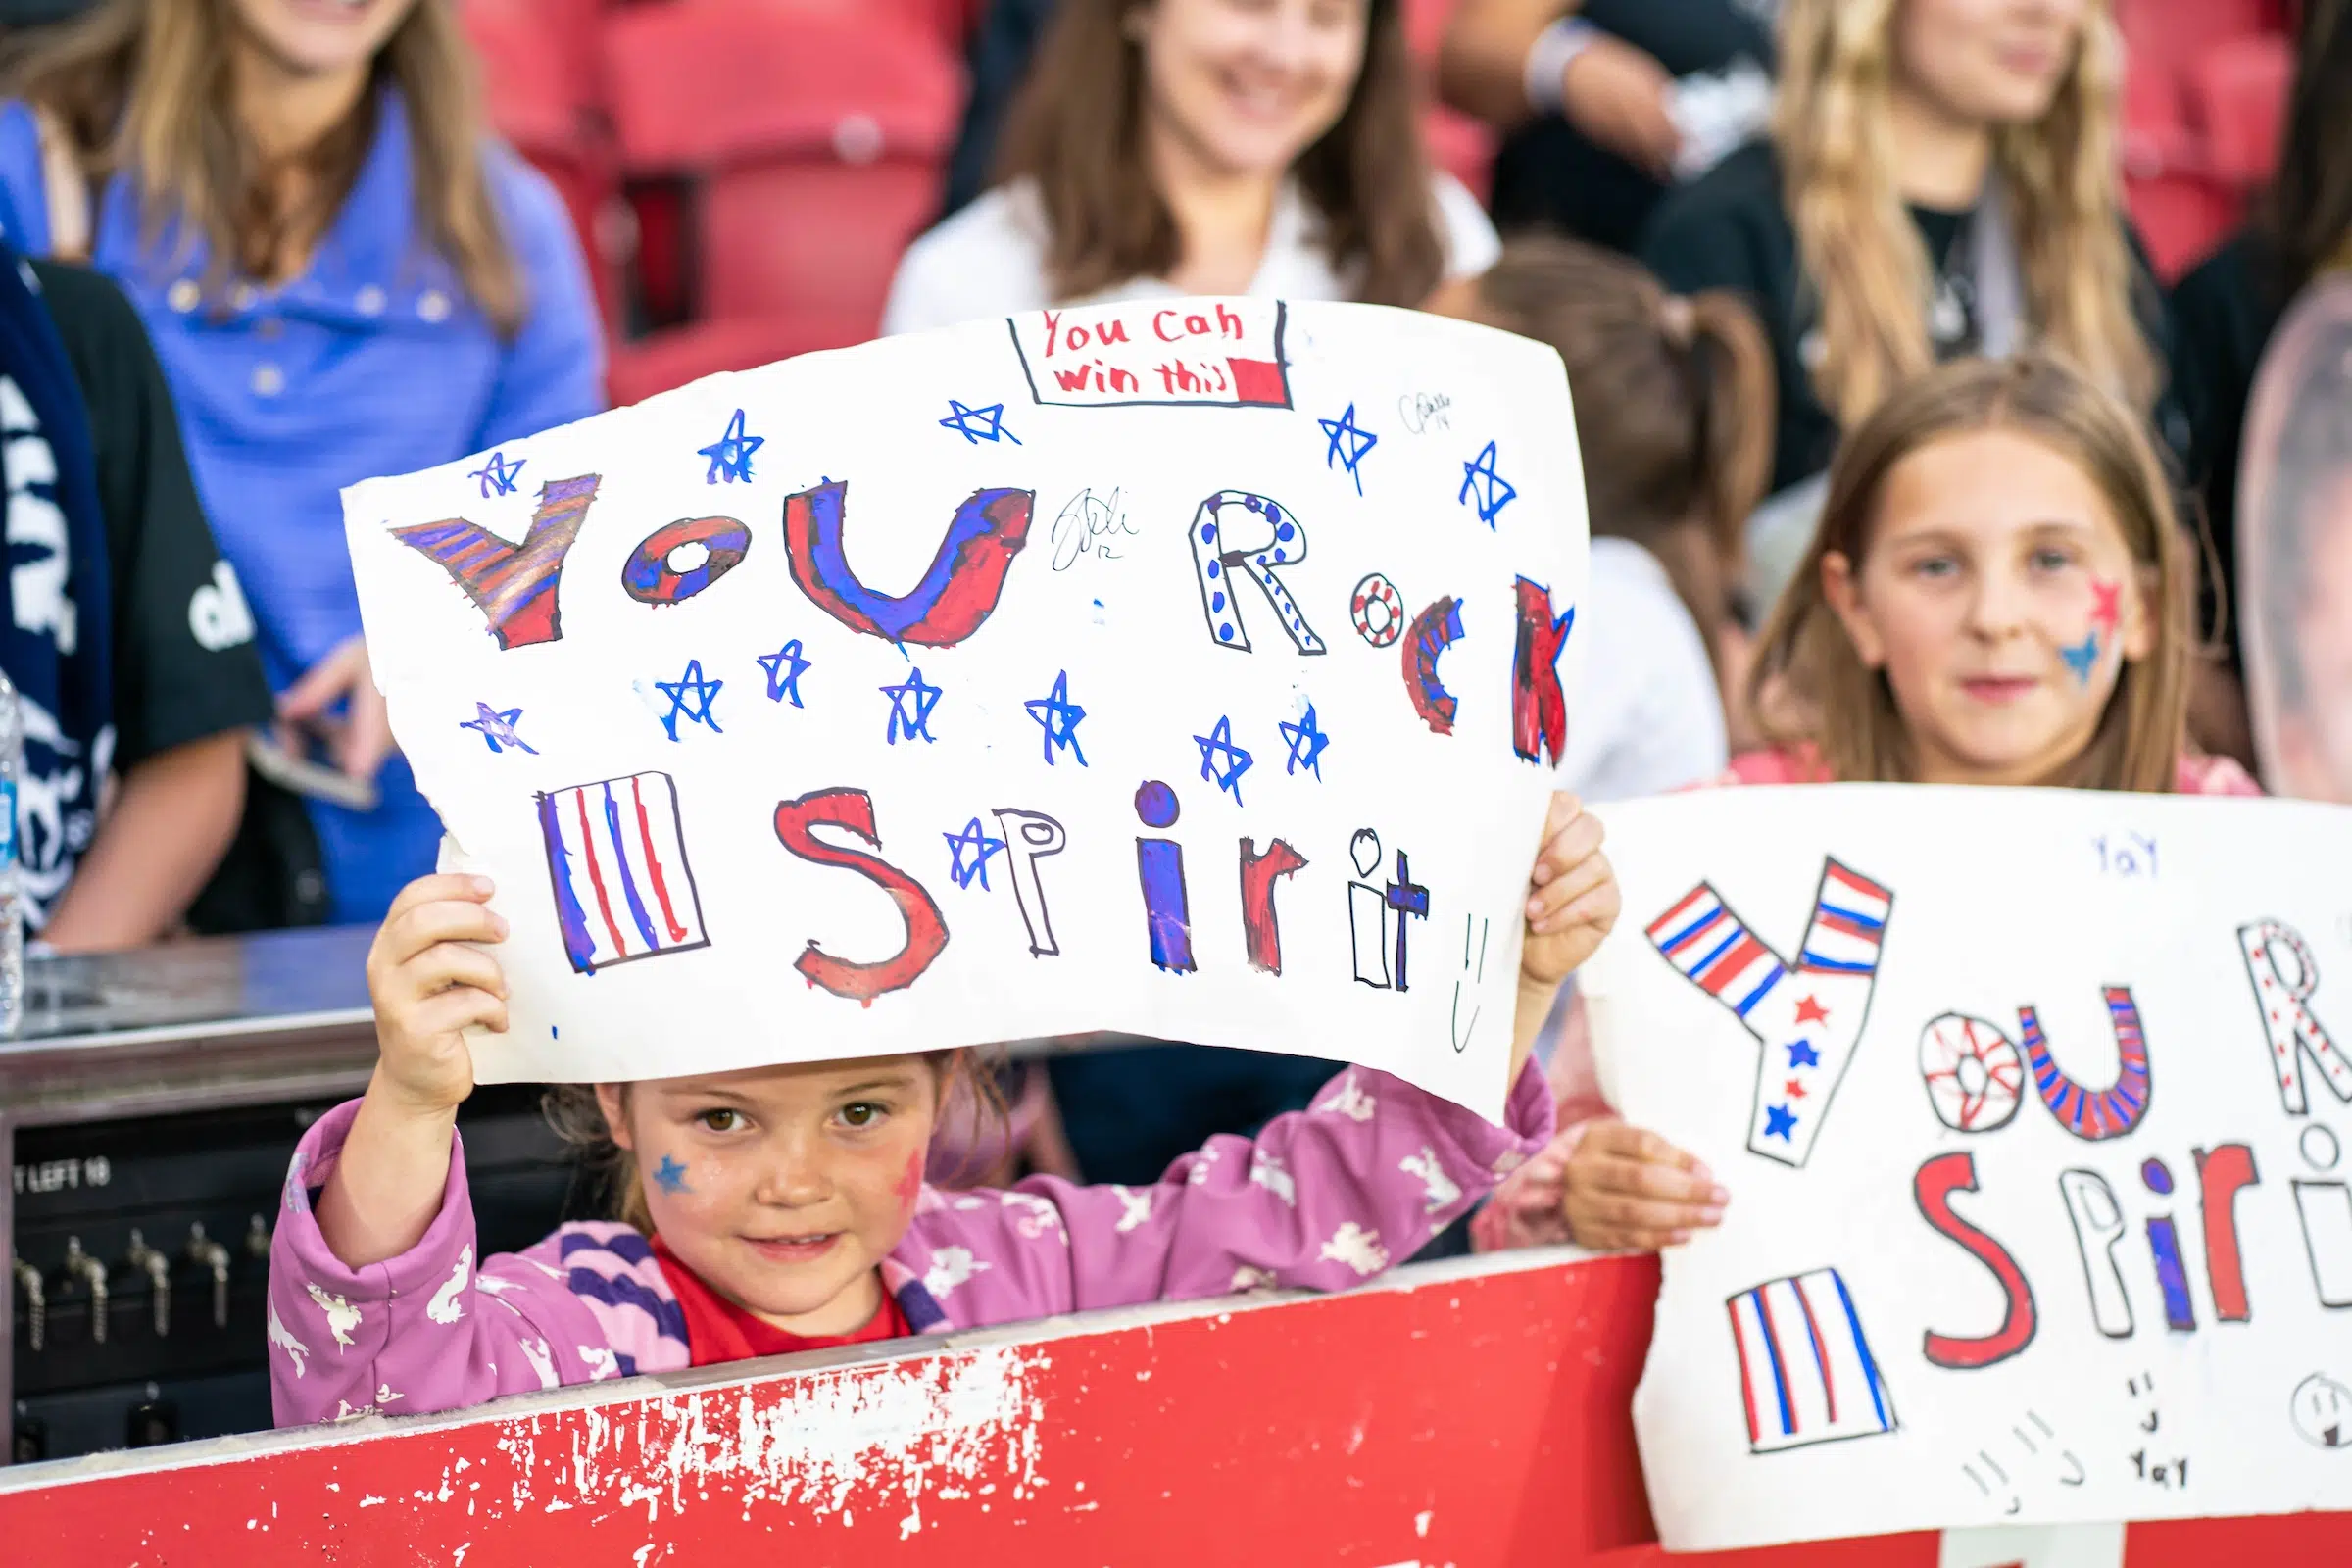 Two young fans hold up handmade signs that read "you rock spirit" in blue and red marker.